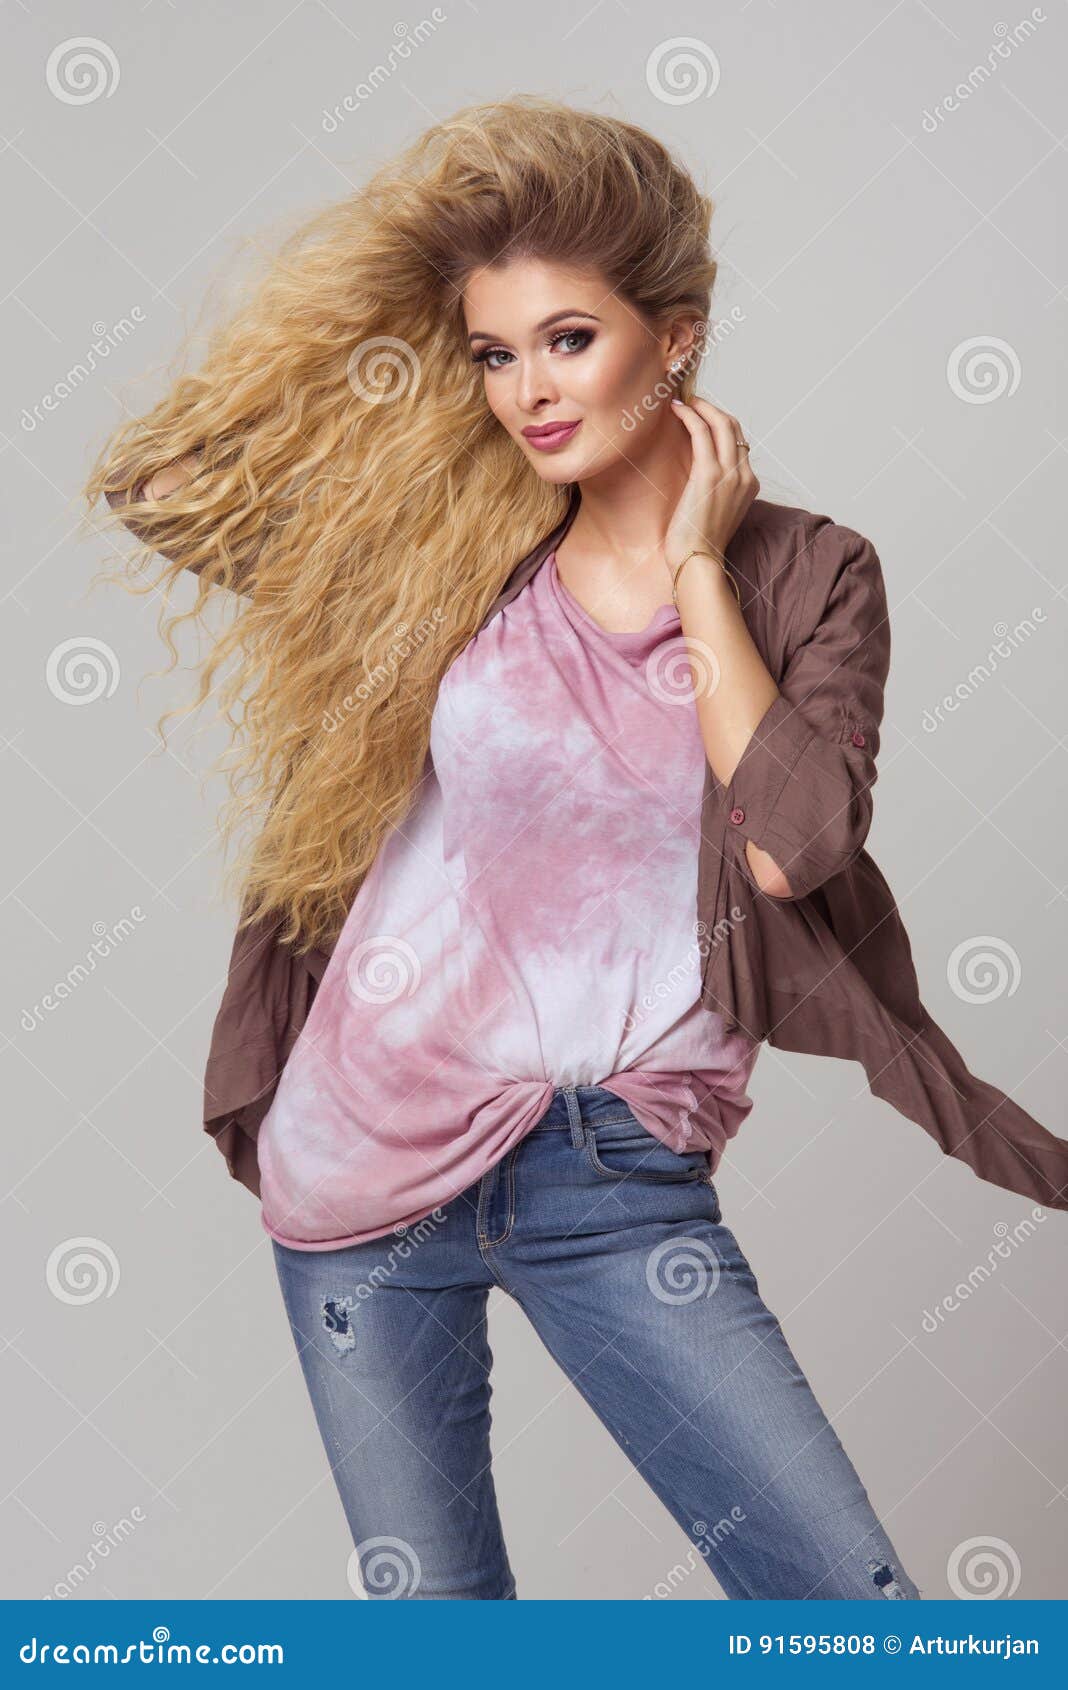 Glamorous Curvy Blonde Woman Stock Photo - Image of people, hands: 91595808